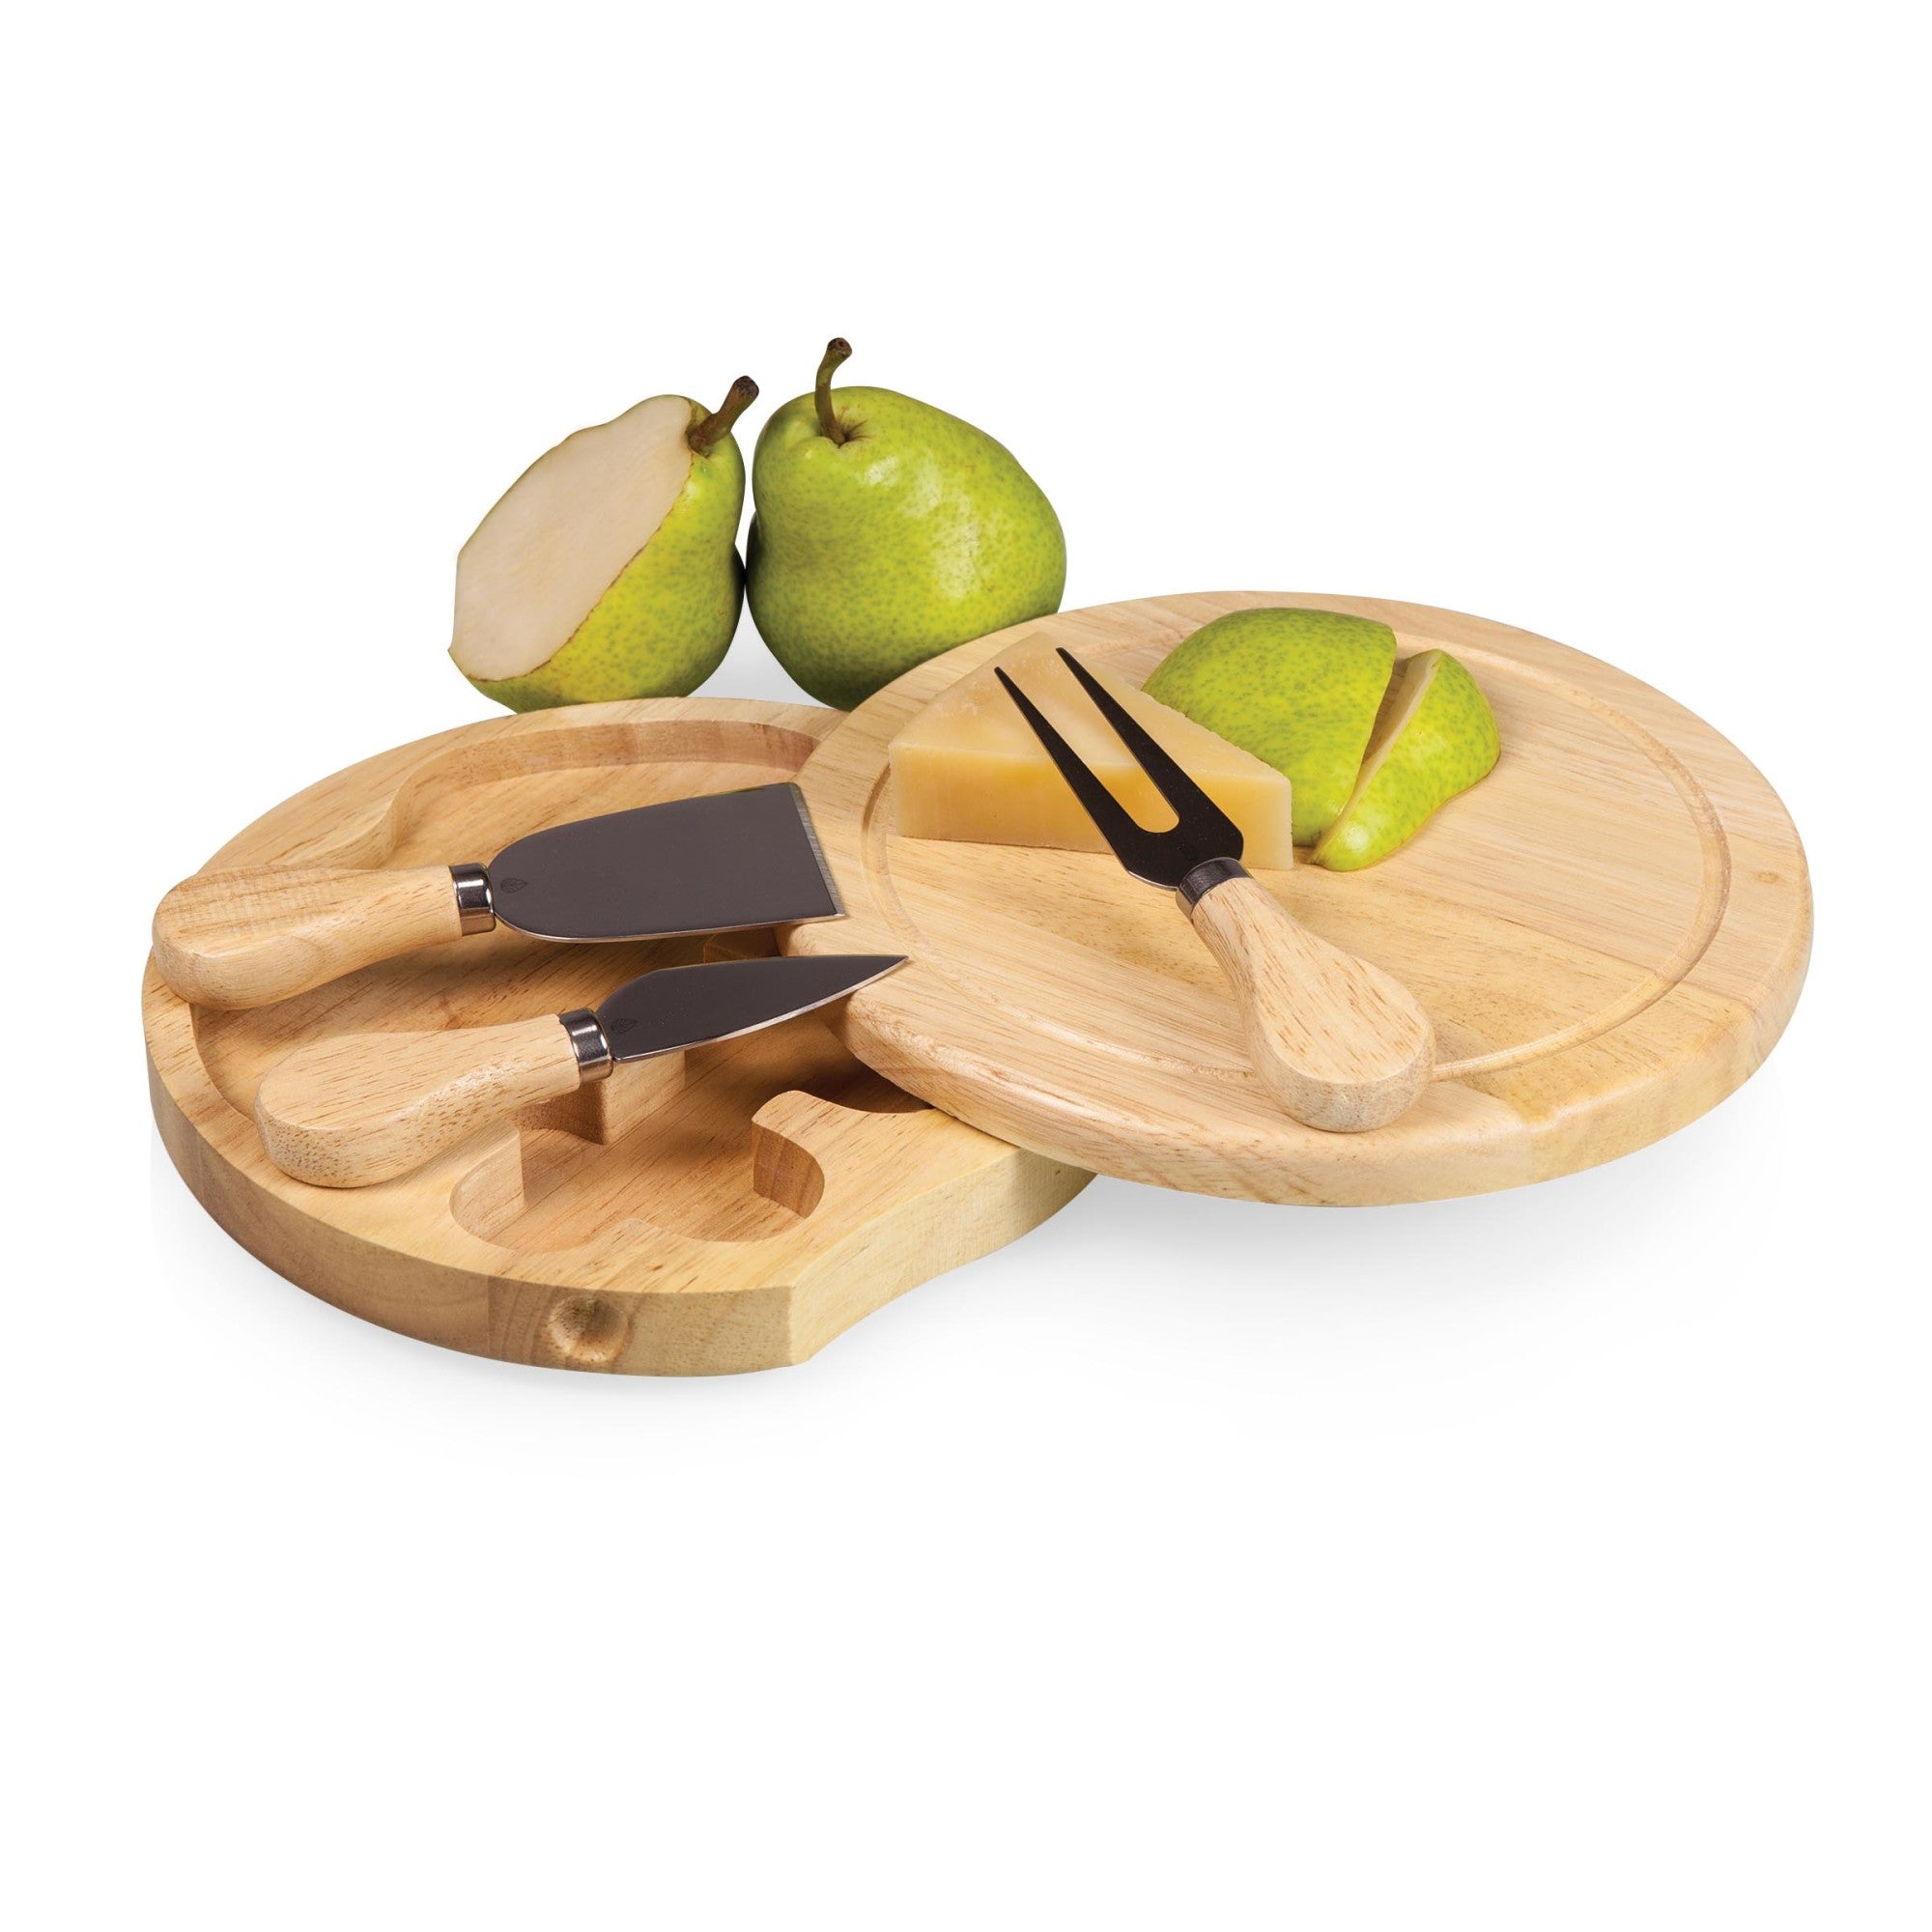 New England Patriots - Brie Cheese Cutting Board & Tools Set